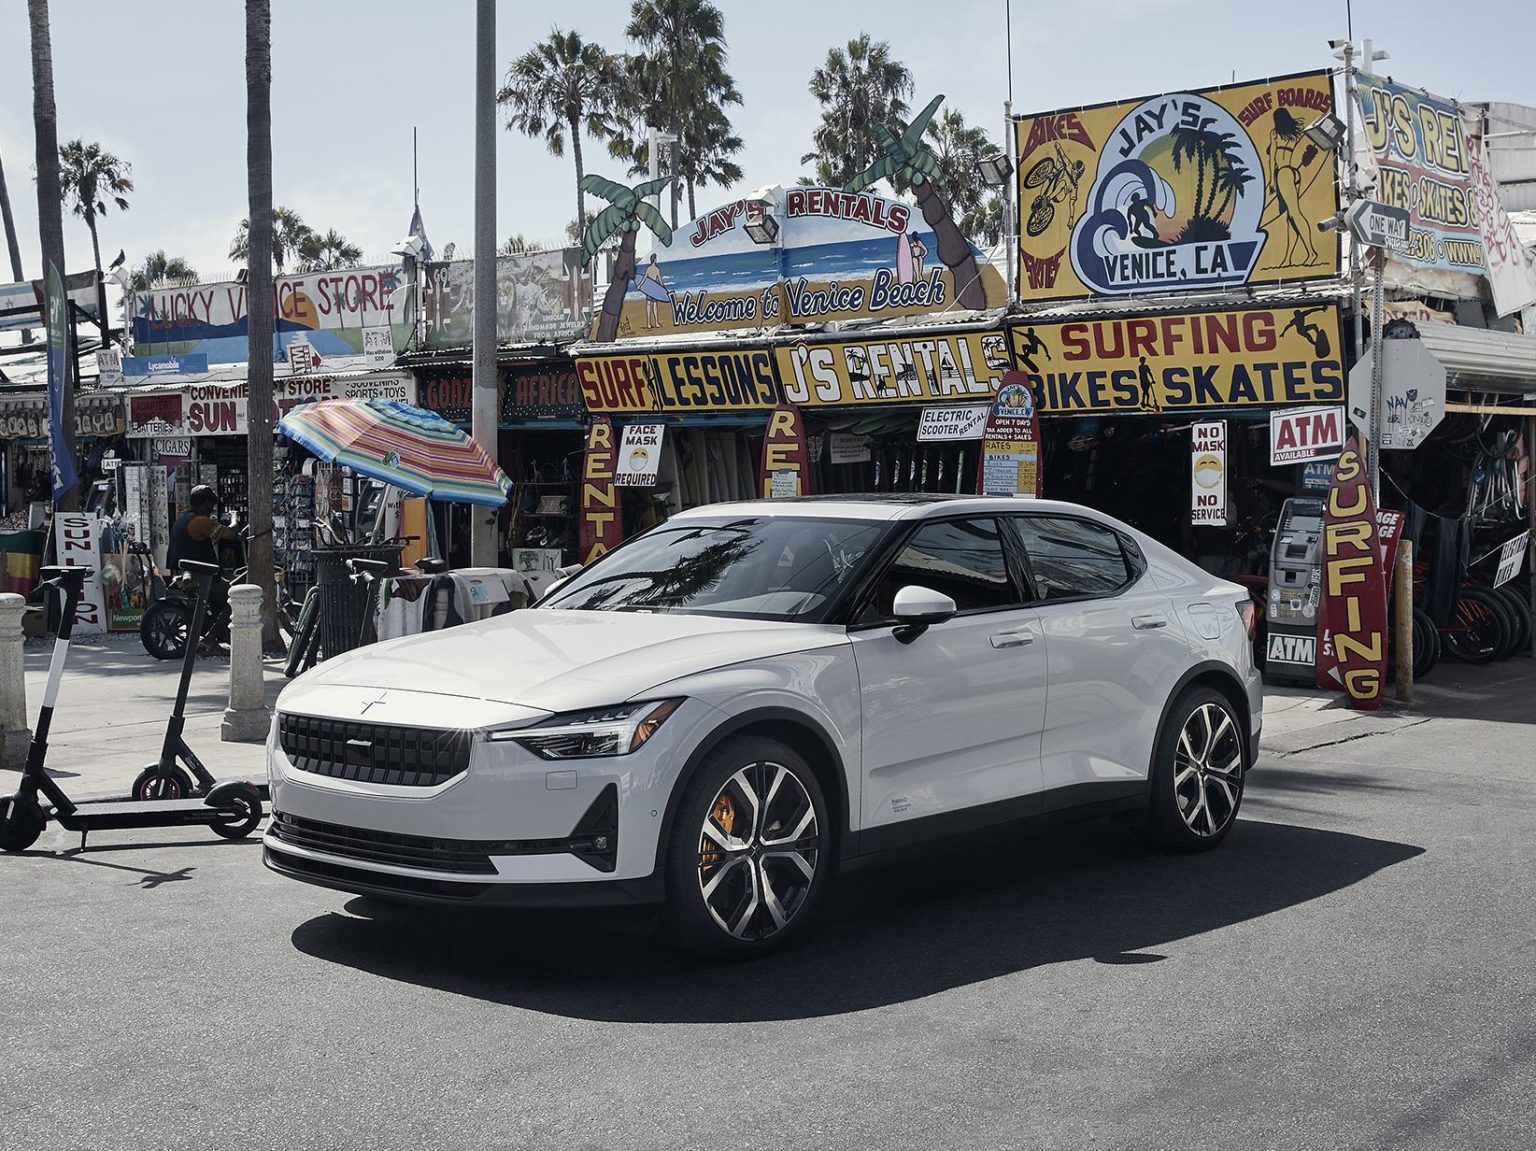 The Polestar 2 is a new electric vehicle option for U.S. buyers.